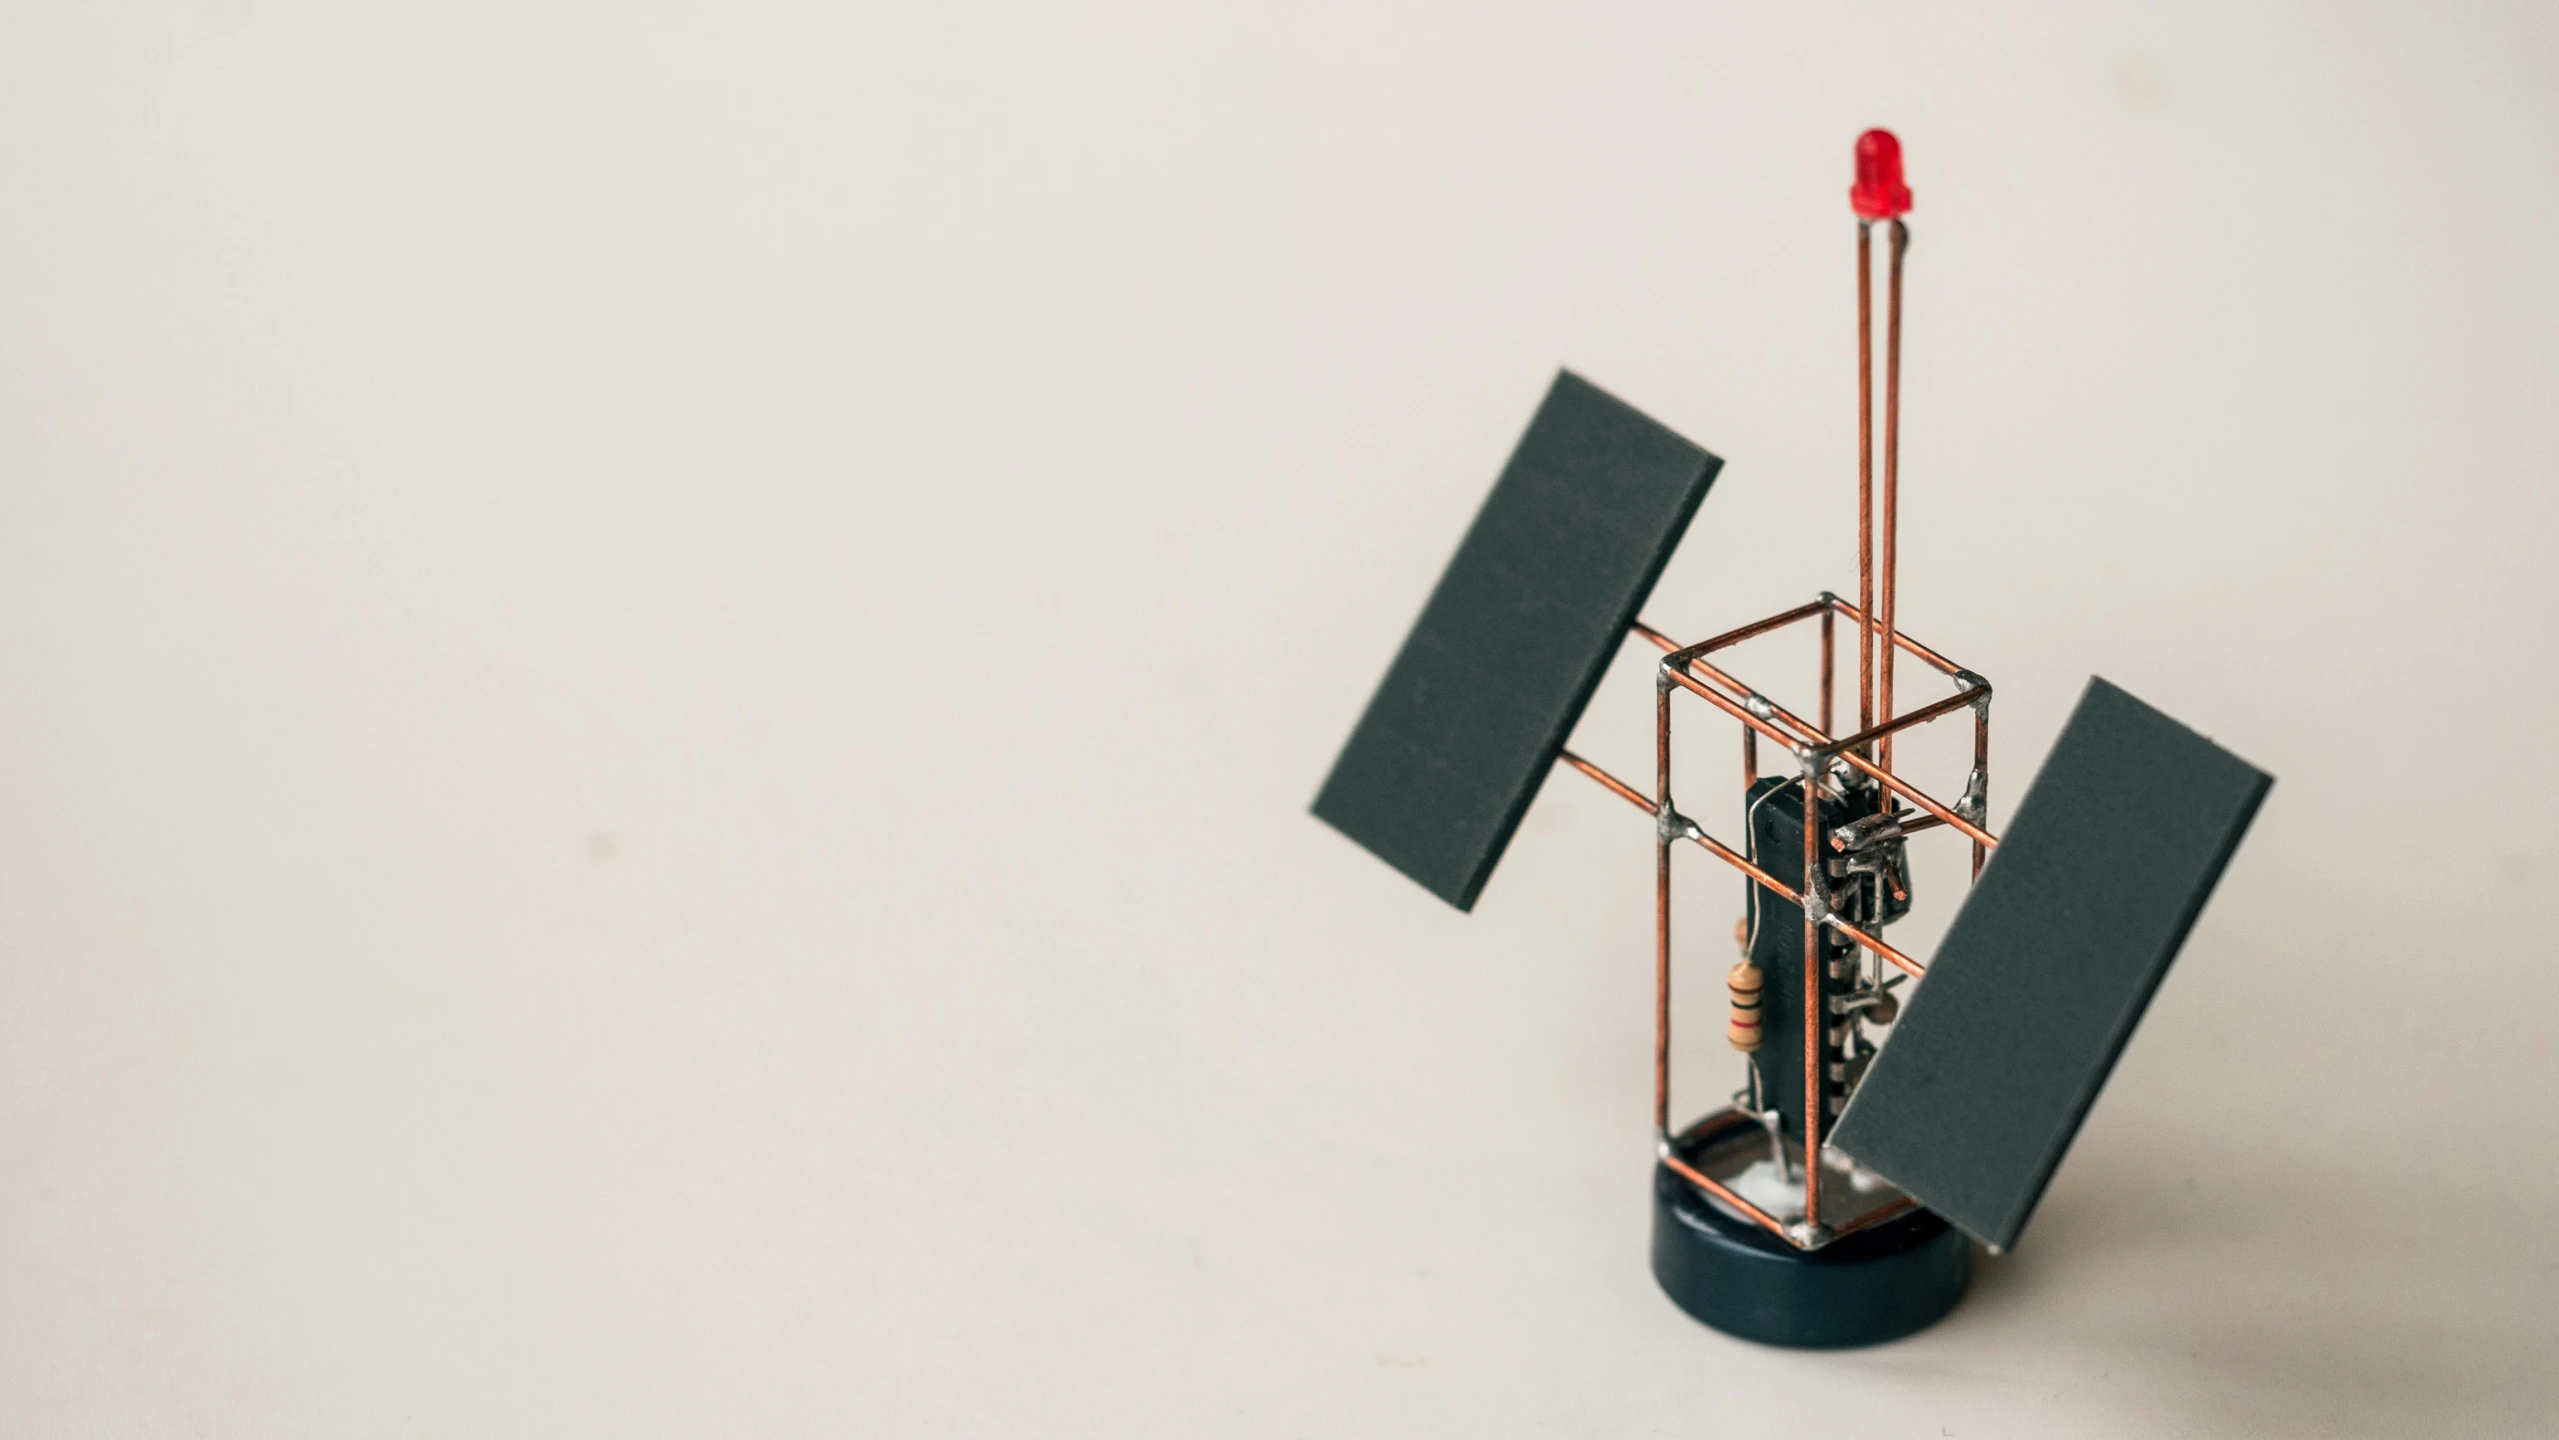 a model of an antenna is shown on the table